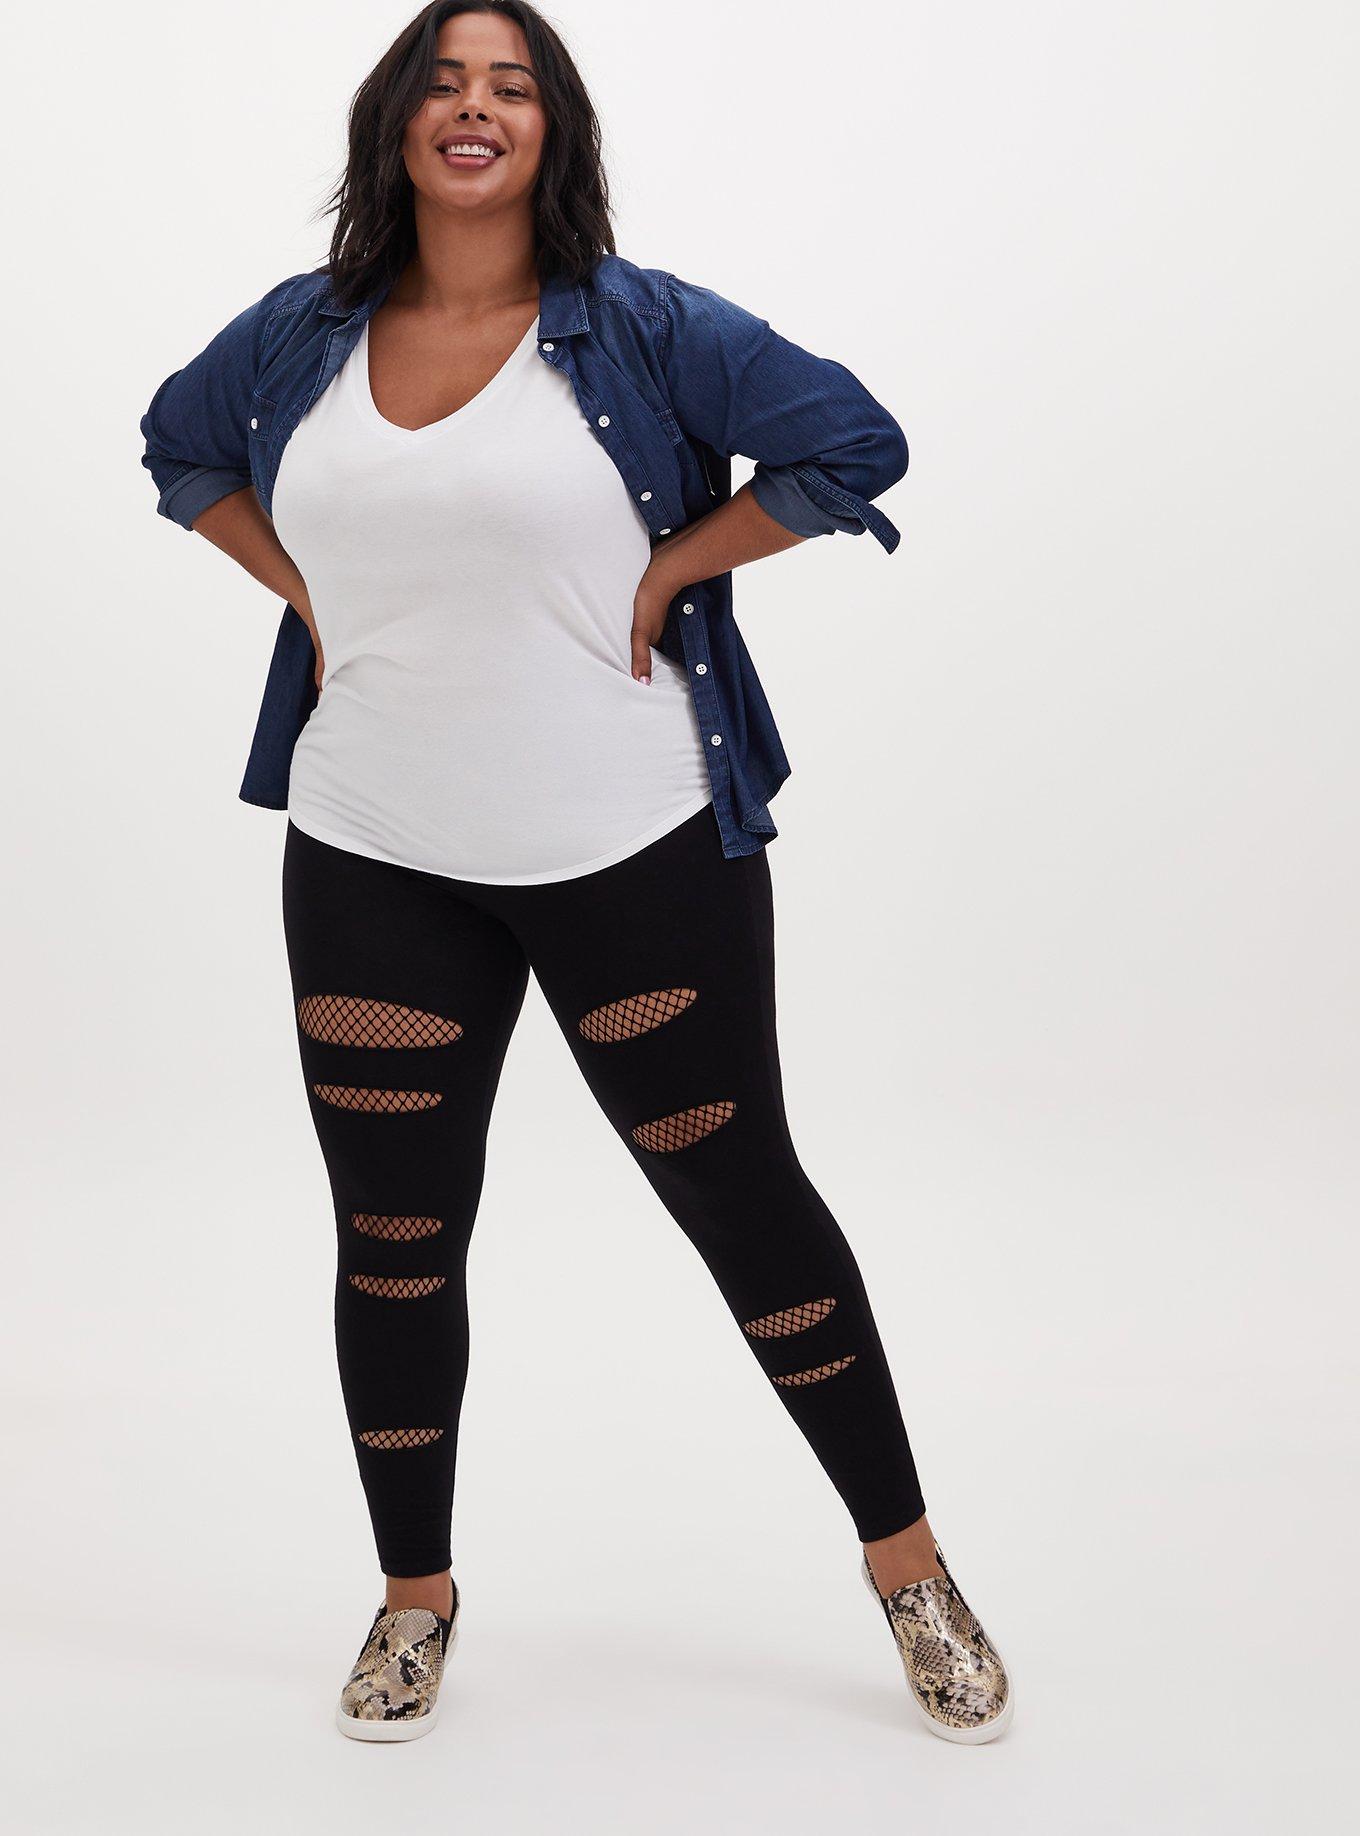 New Cuts Plus Size , All Sizes Womens Black Legging and Tights Plus Size  and Regular Size Rocker Cut Leggings 